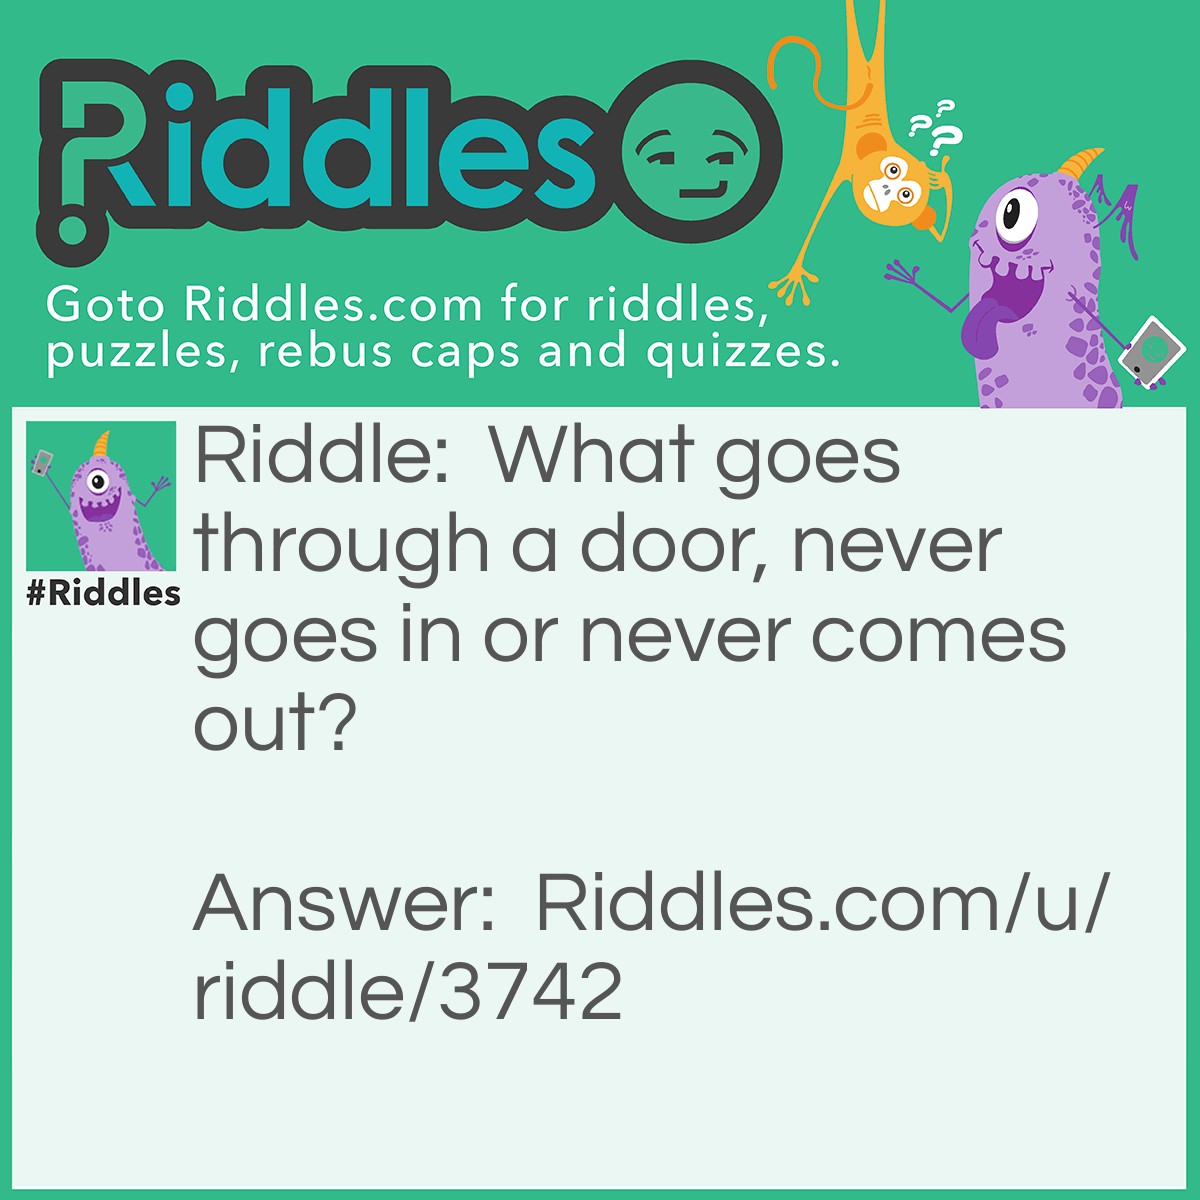 Riddle: What goes through a door, never goes in or never comes out? Answer: A keyhole.